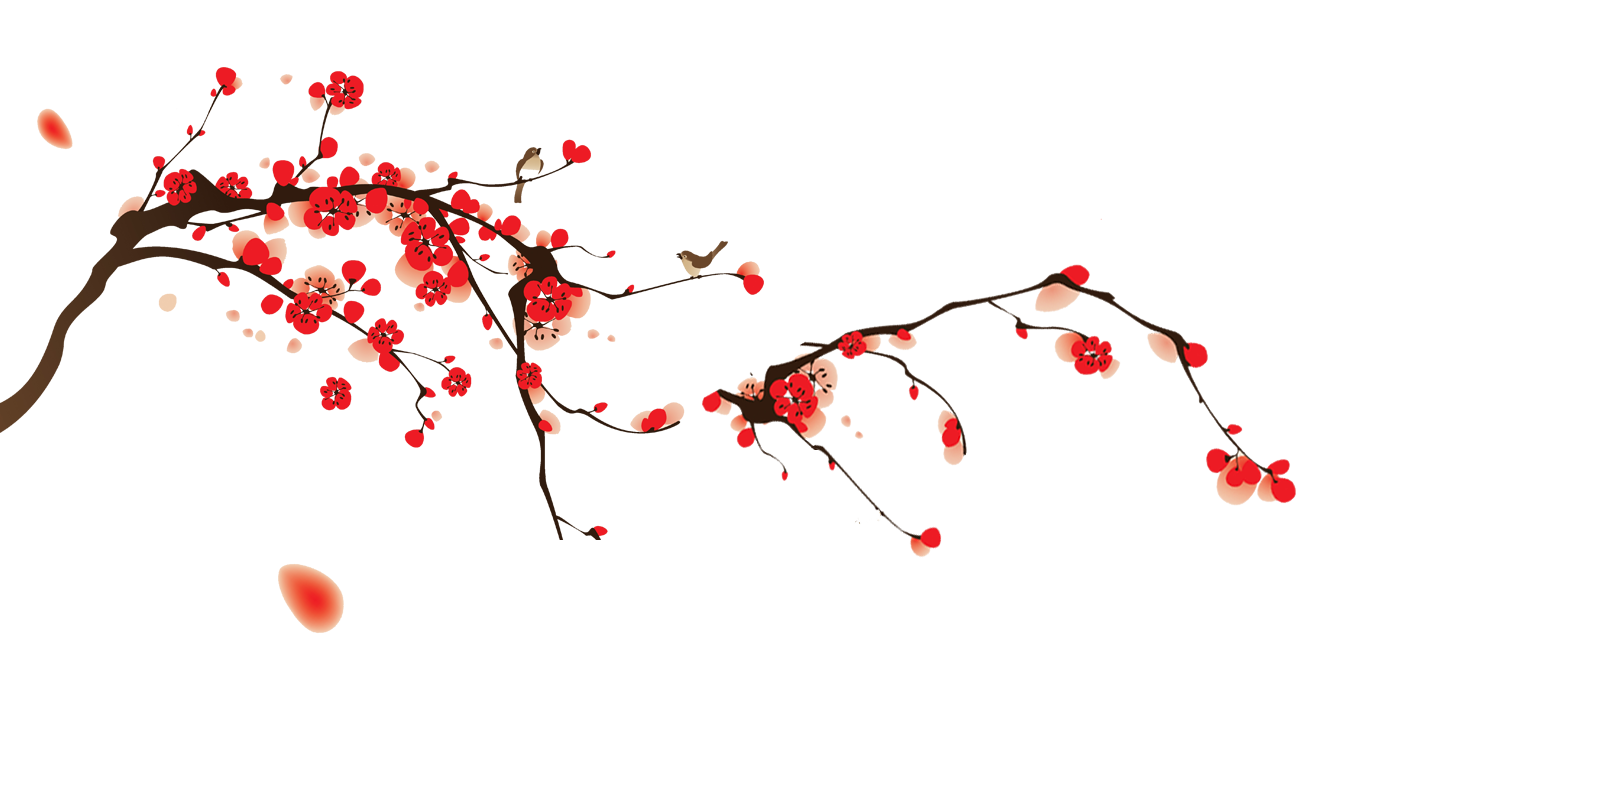 Japanese Flowering Cherry Images Download Free Image PNG Image